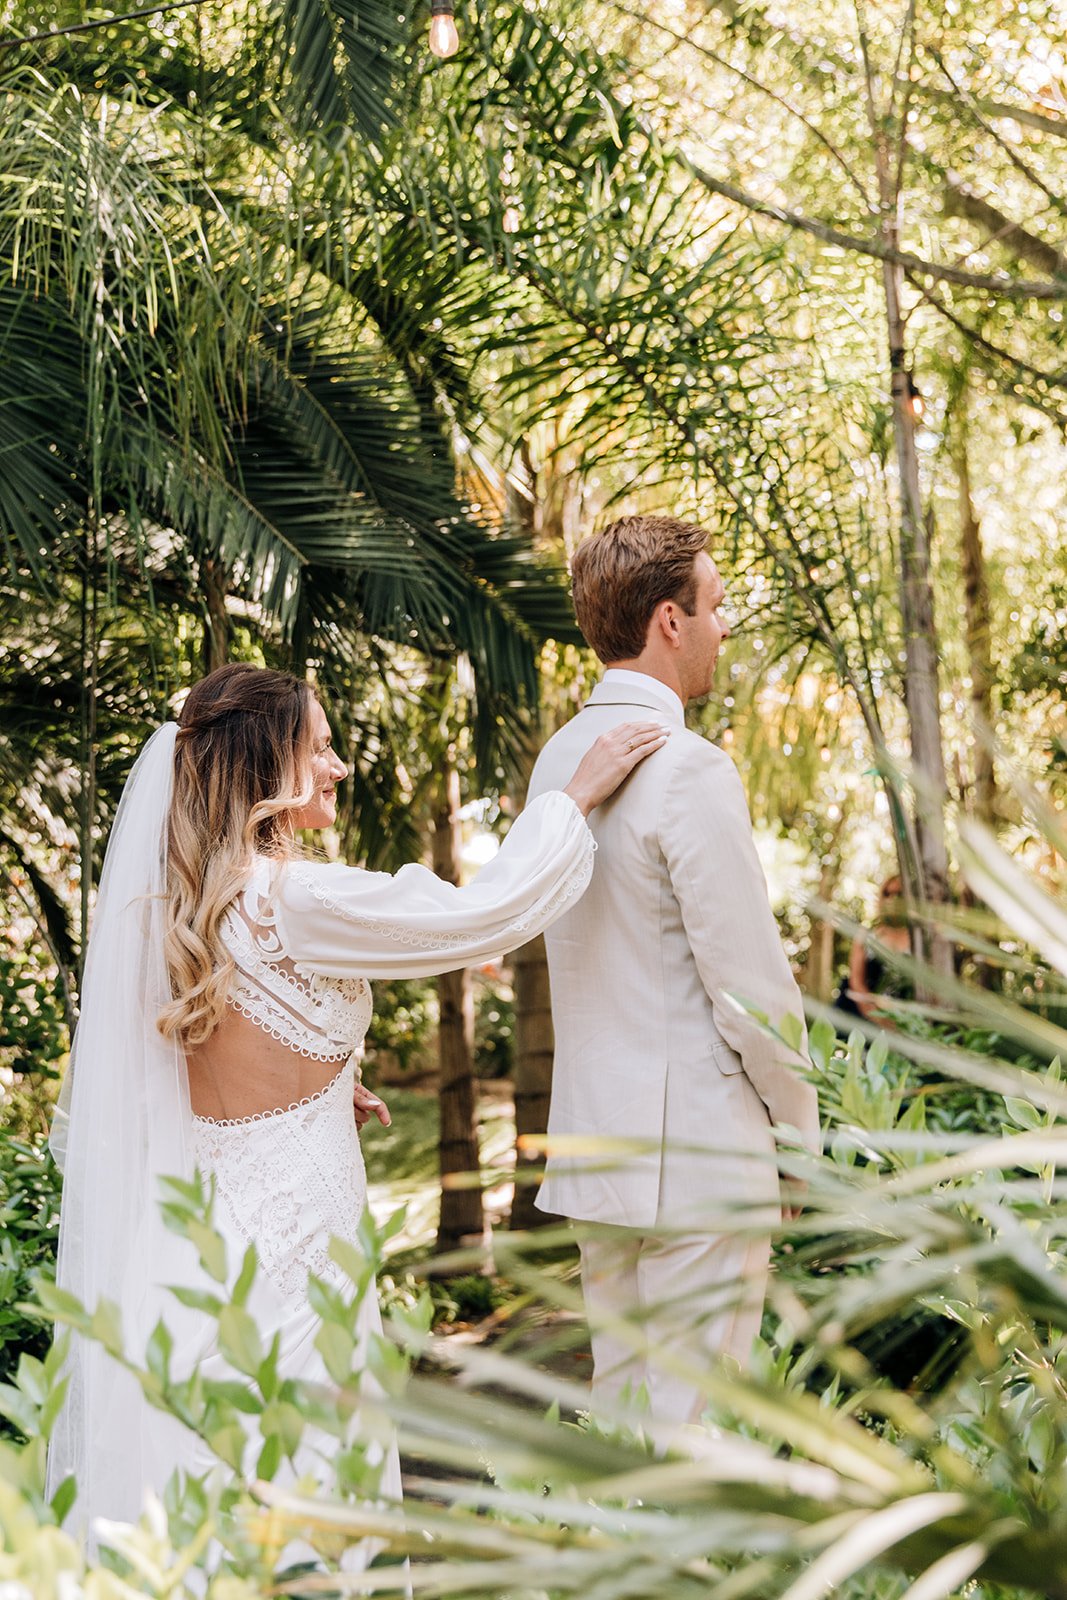 All About Weddings At The Botanica In Oceanside: A Tropical Paradise Wedding Venue